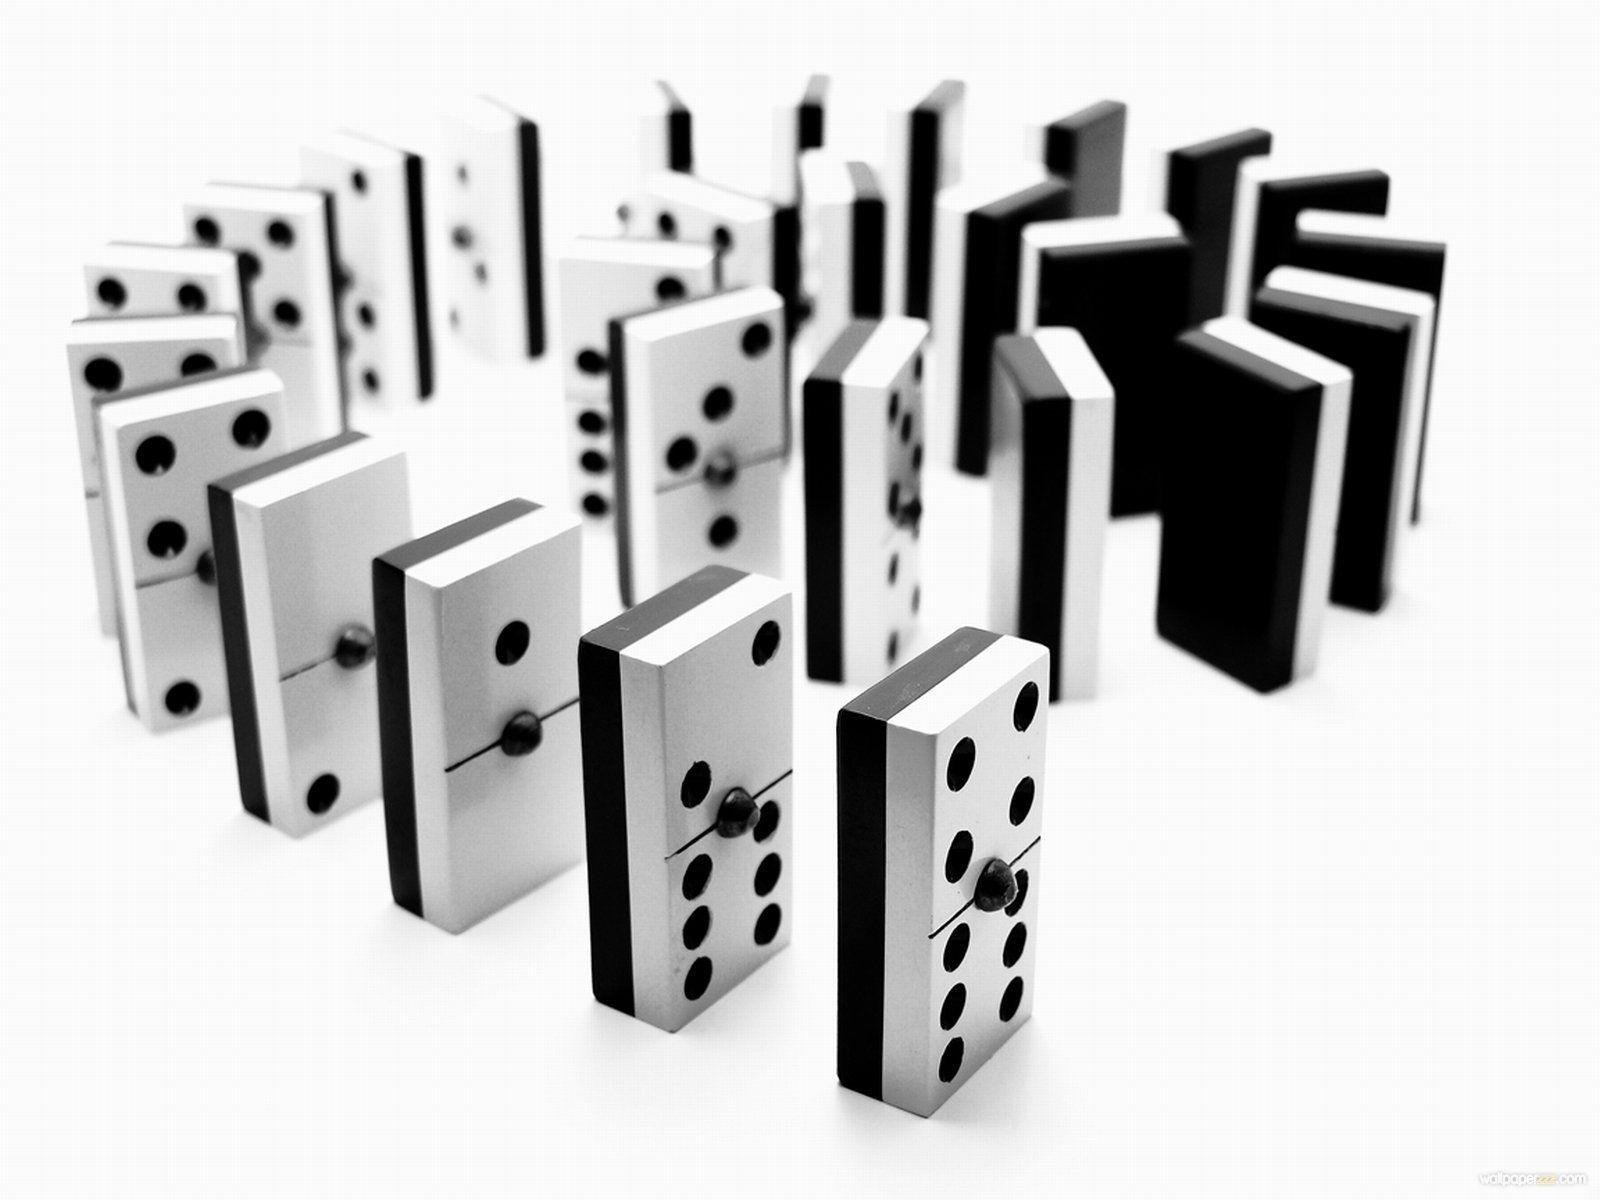 Awesome Domino HD Wallpaper Free Download